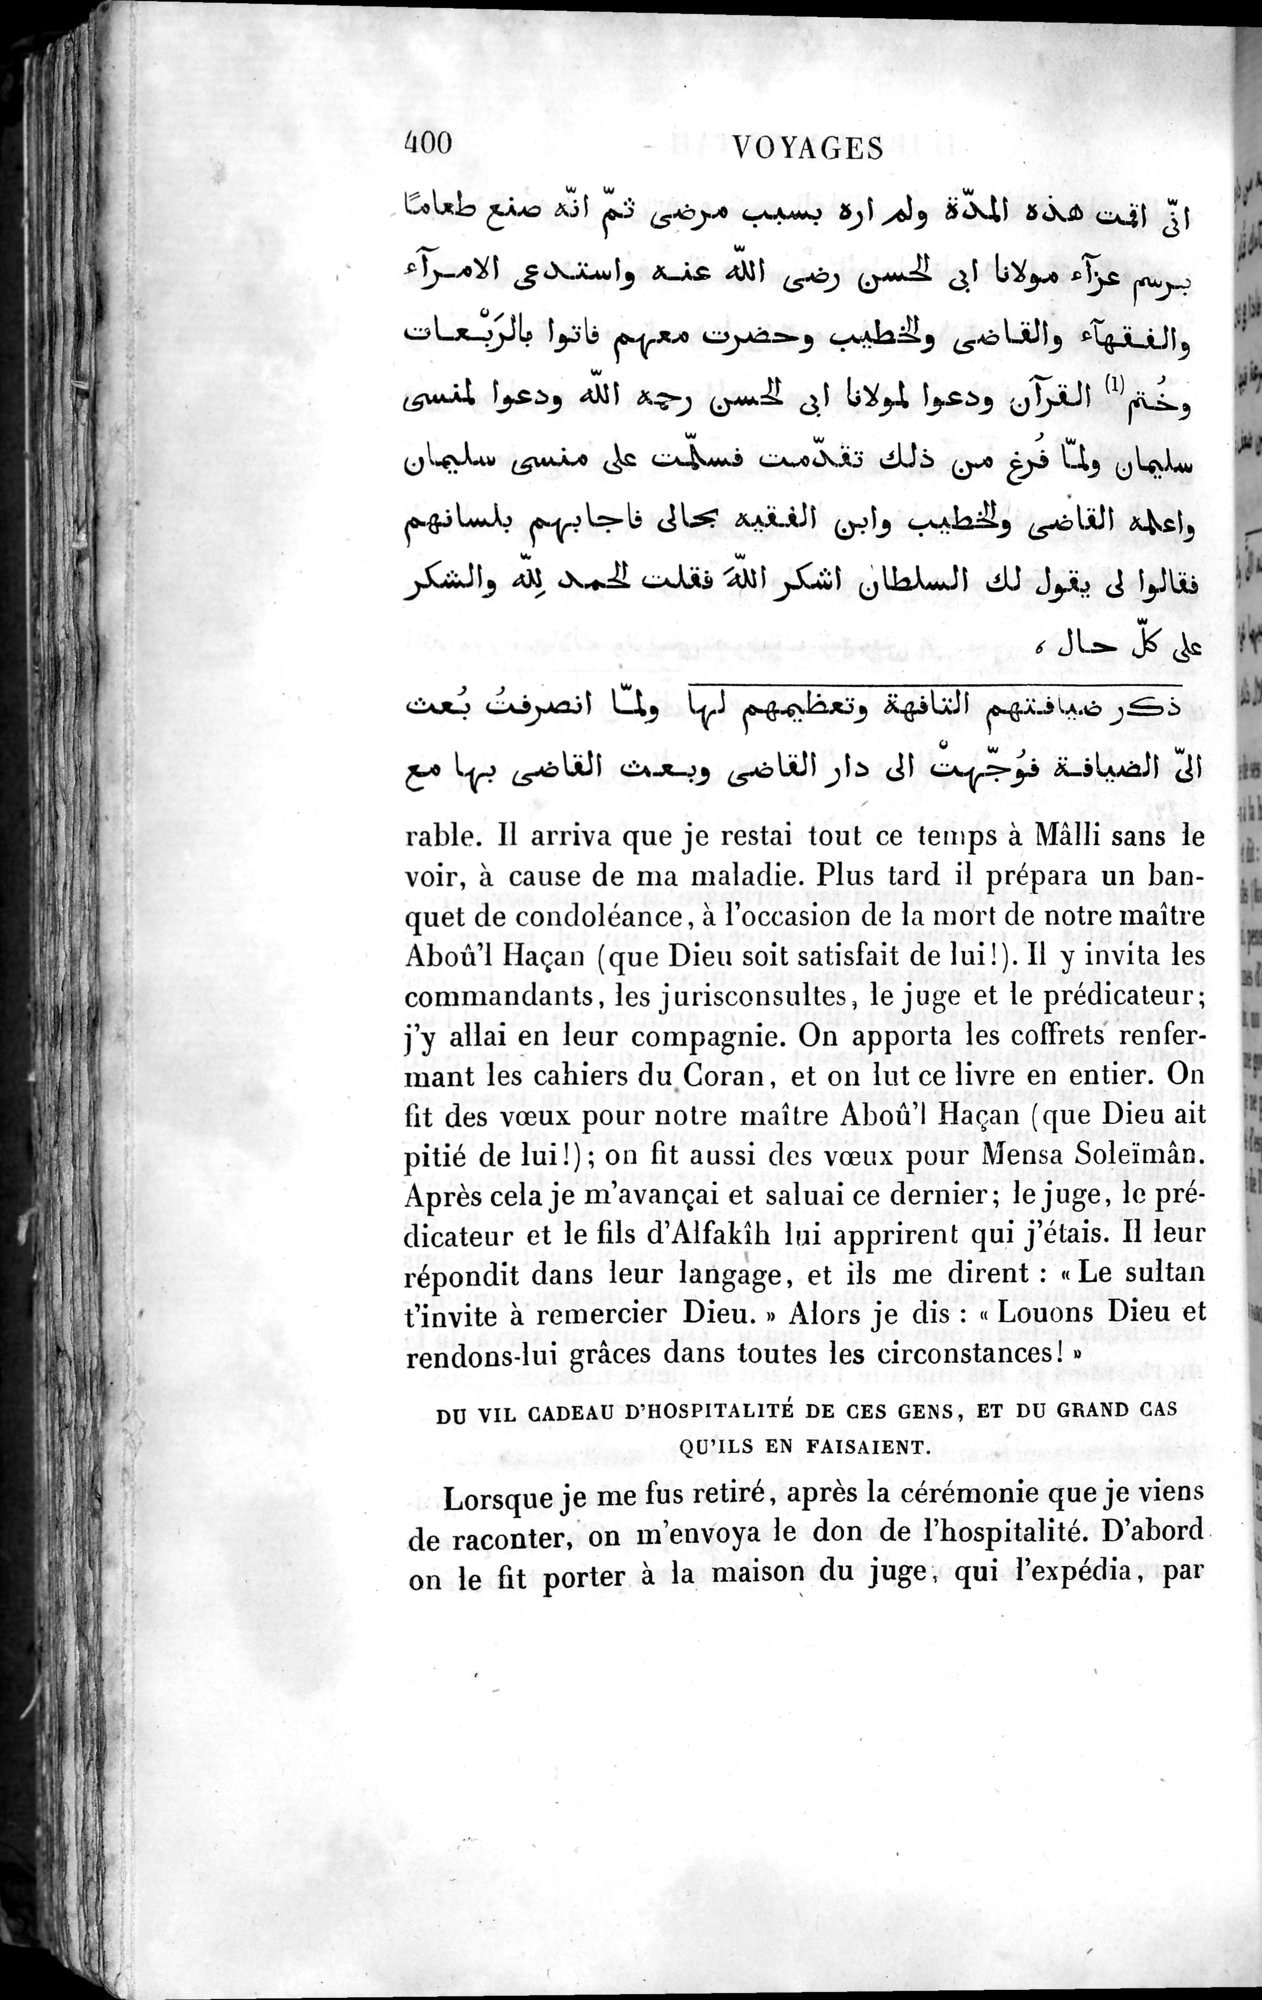 Voyages d'Ibn Batoutah : vol.4 / Page 412 (Grayscale High Resolution Image)